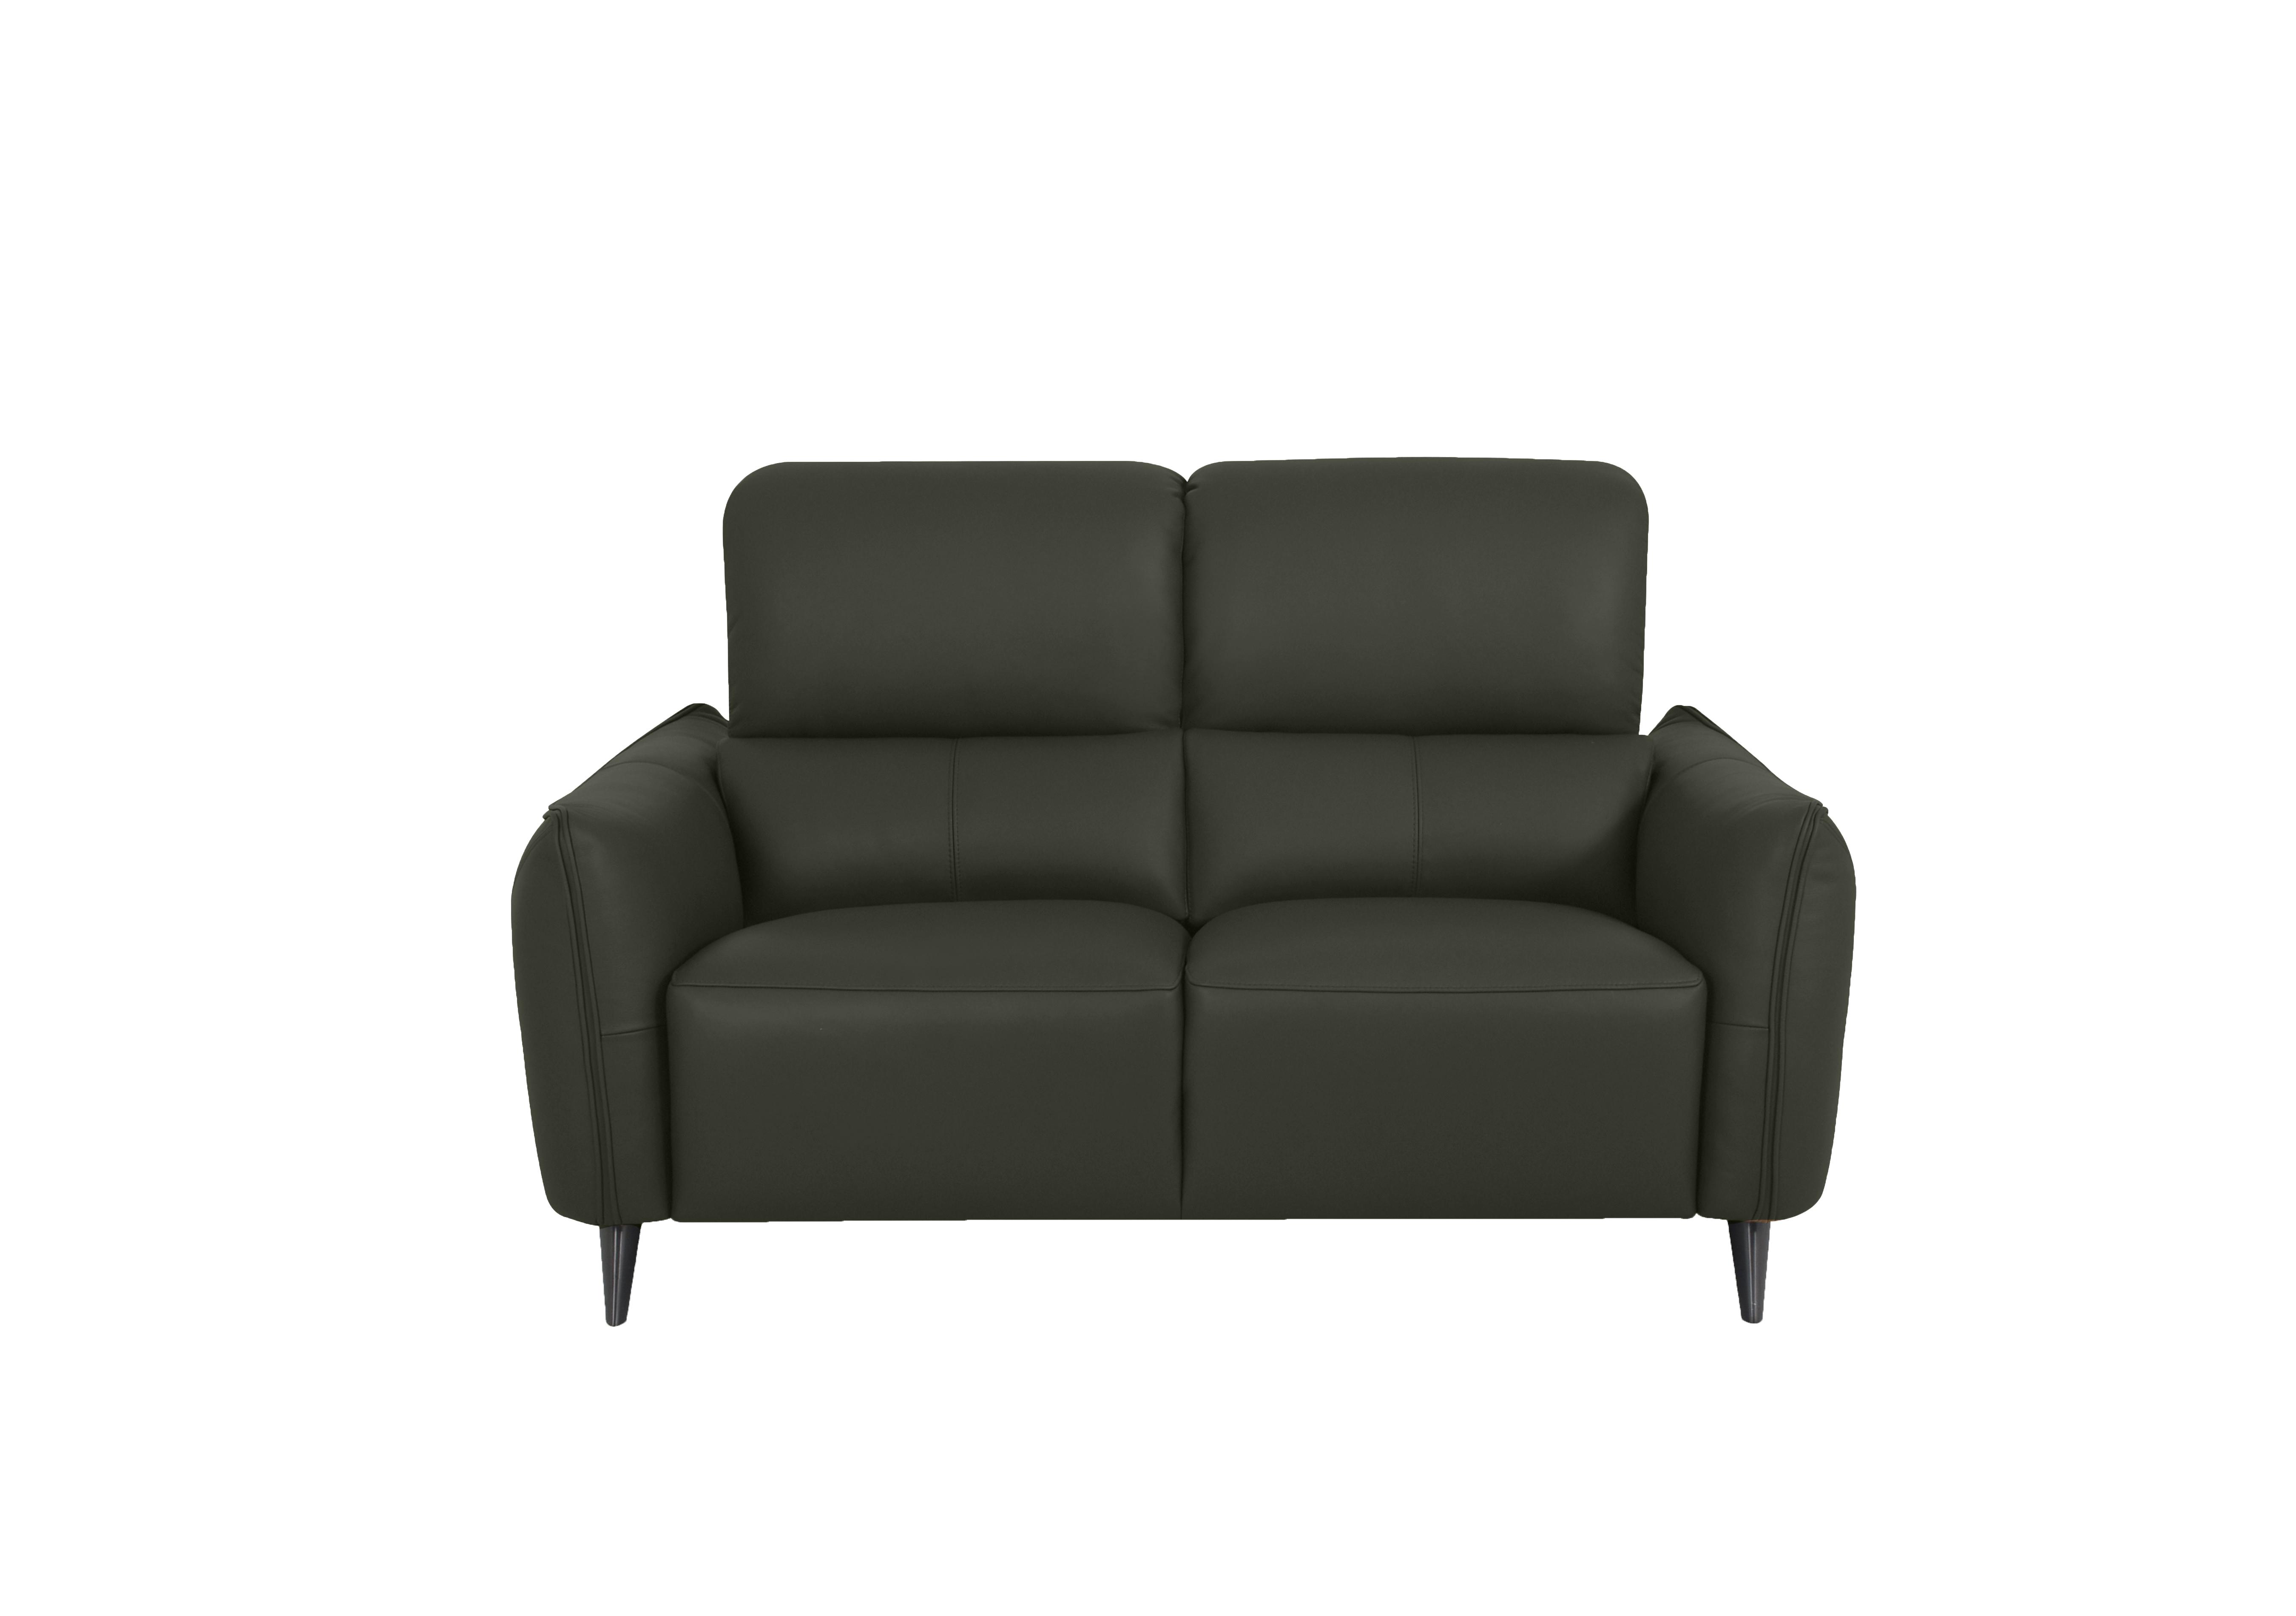 Maddox 2 Seater Leather Sofa in Nn-570e Olive Green on Furniture Village